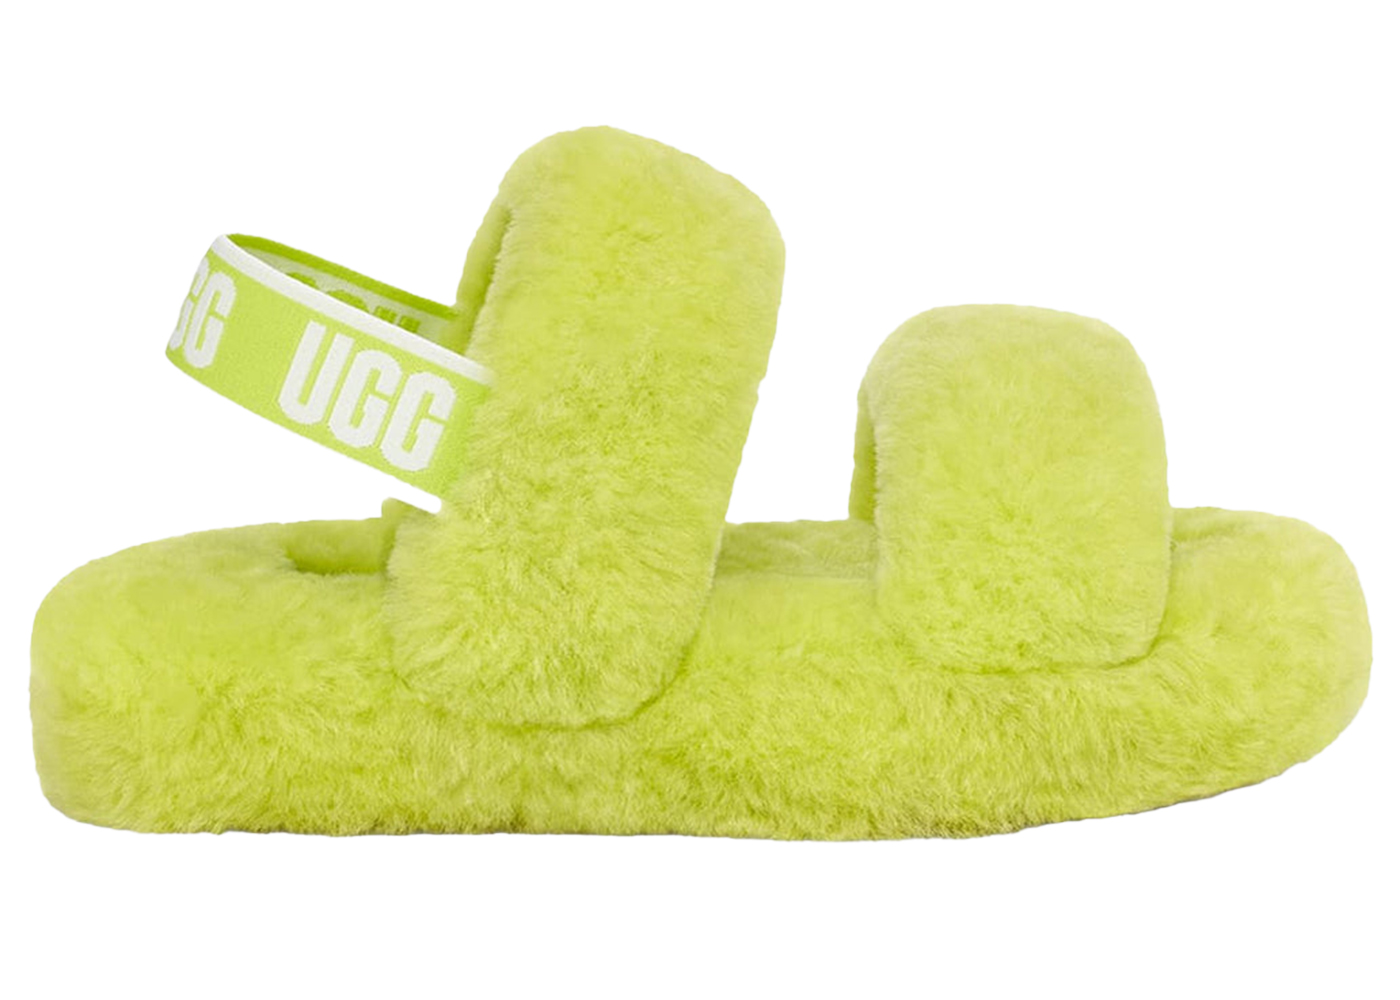 UGG Sport Yeah Slide Canary Yellow (Women's) - 1126811-CAN - US